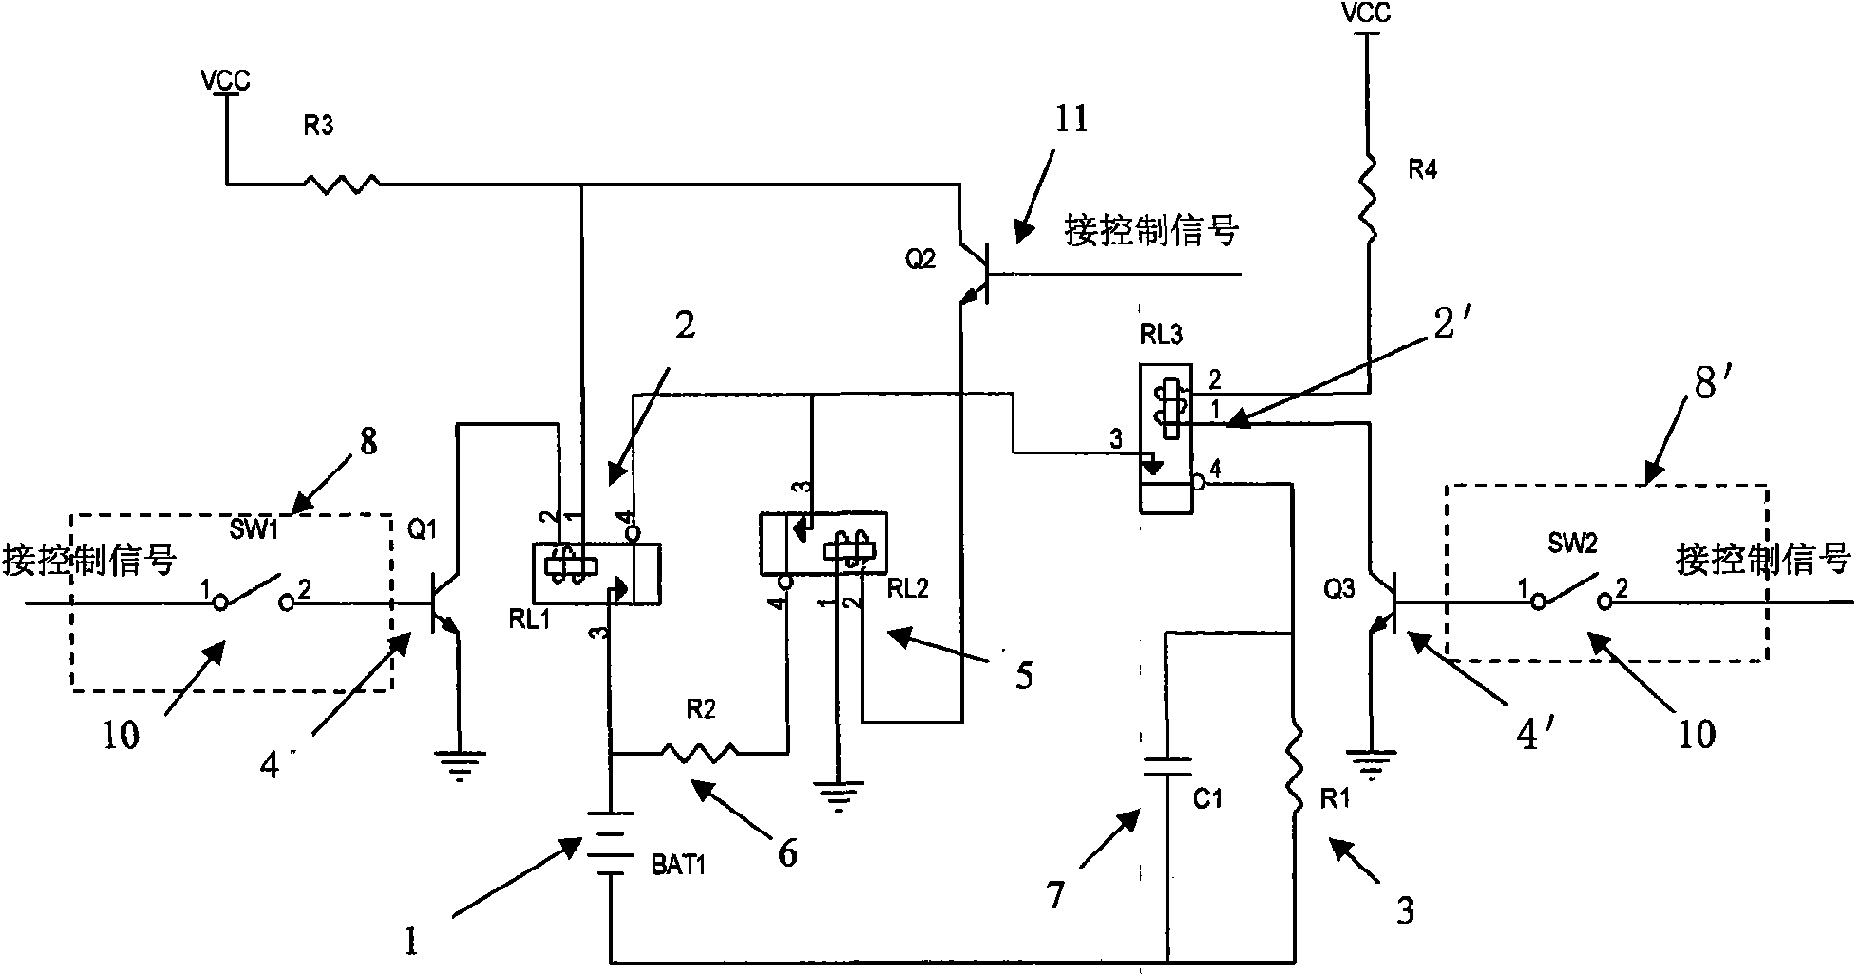 Relay control circuit of hybrid vehicle